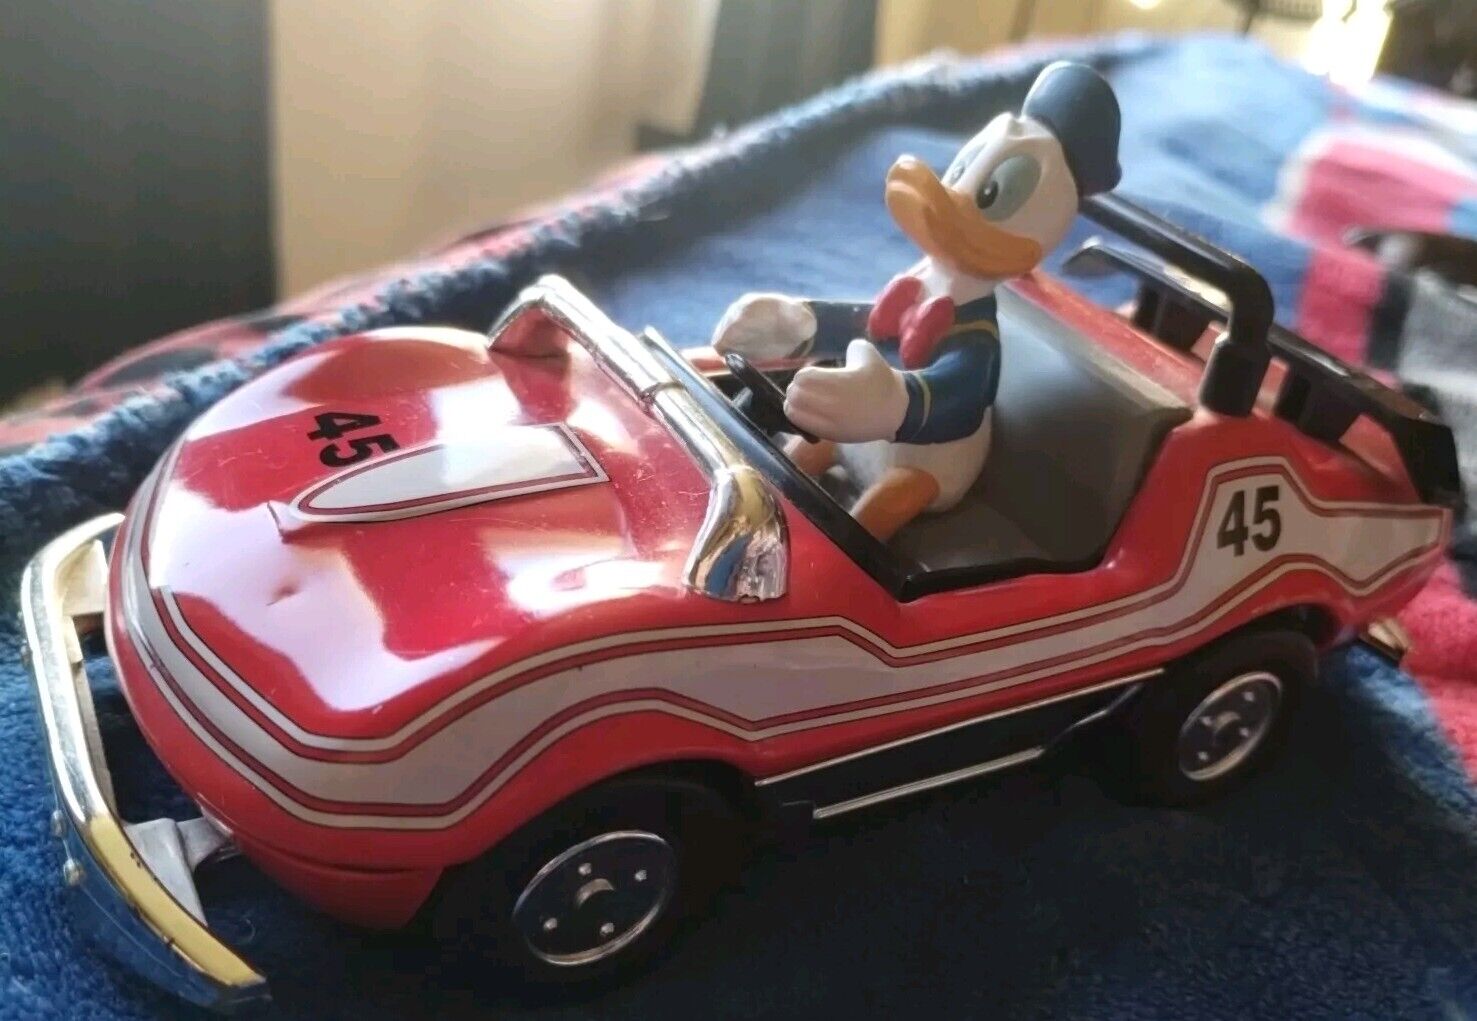 Vntg Disney Donald Duck #45Tin Metal Pull Back Friction Toy Red Race Car